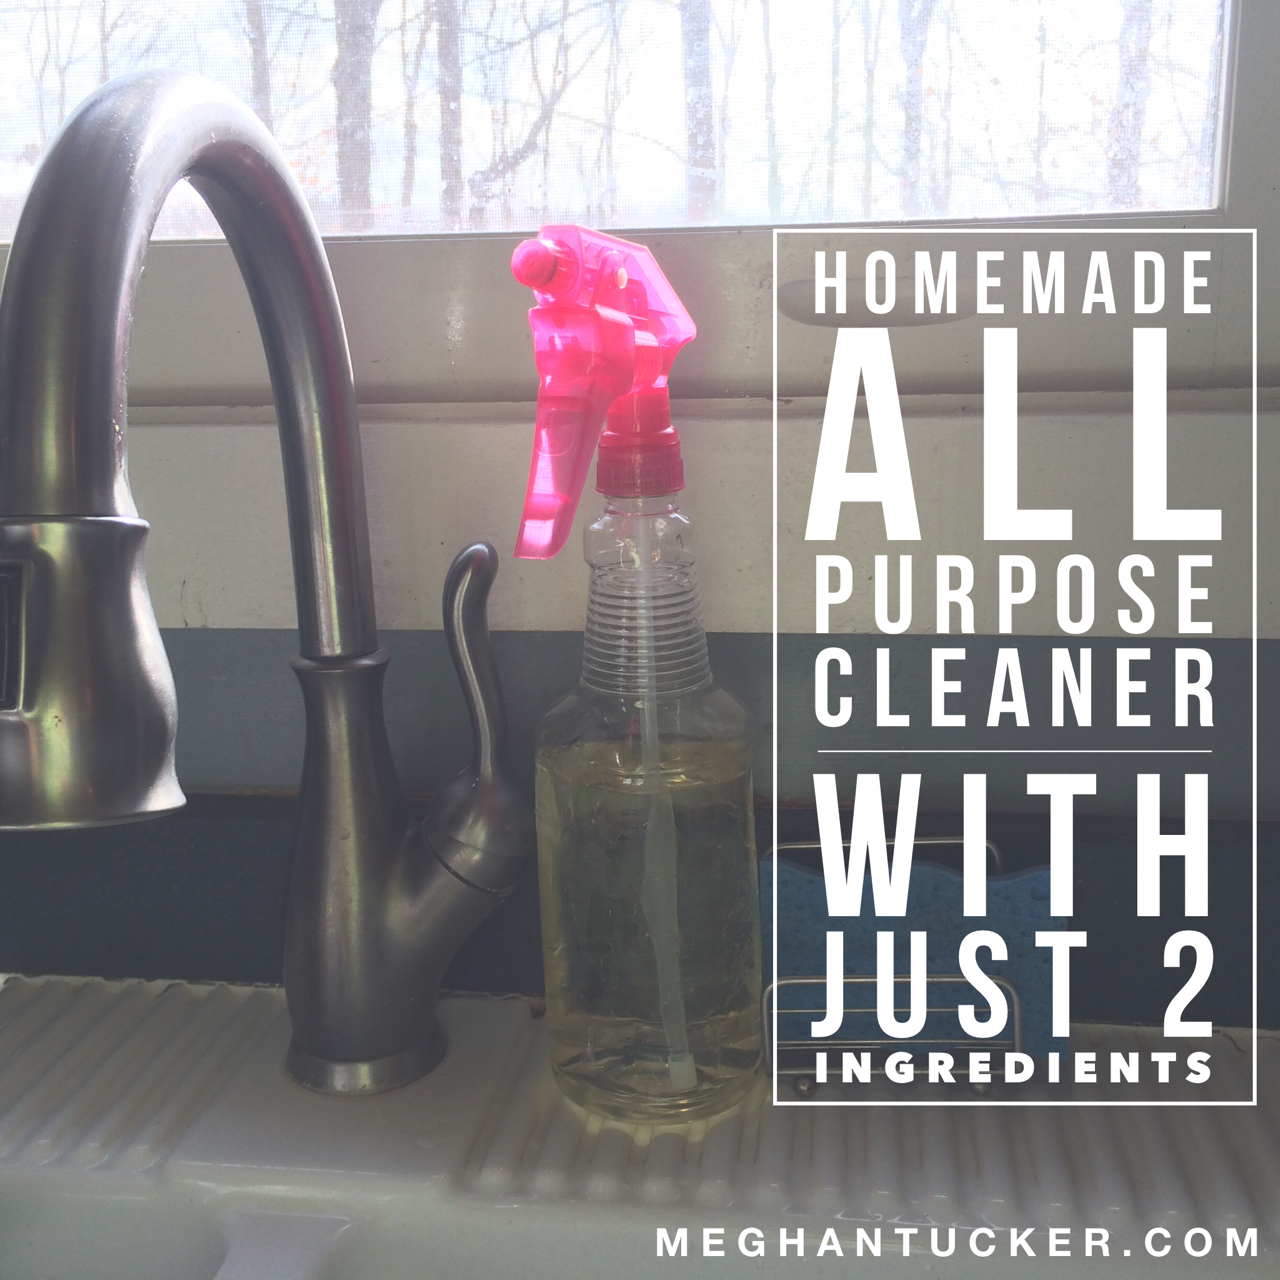 Homemade All Purpose Cleaner Using 2 Household Ingredients